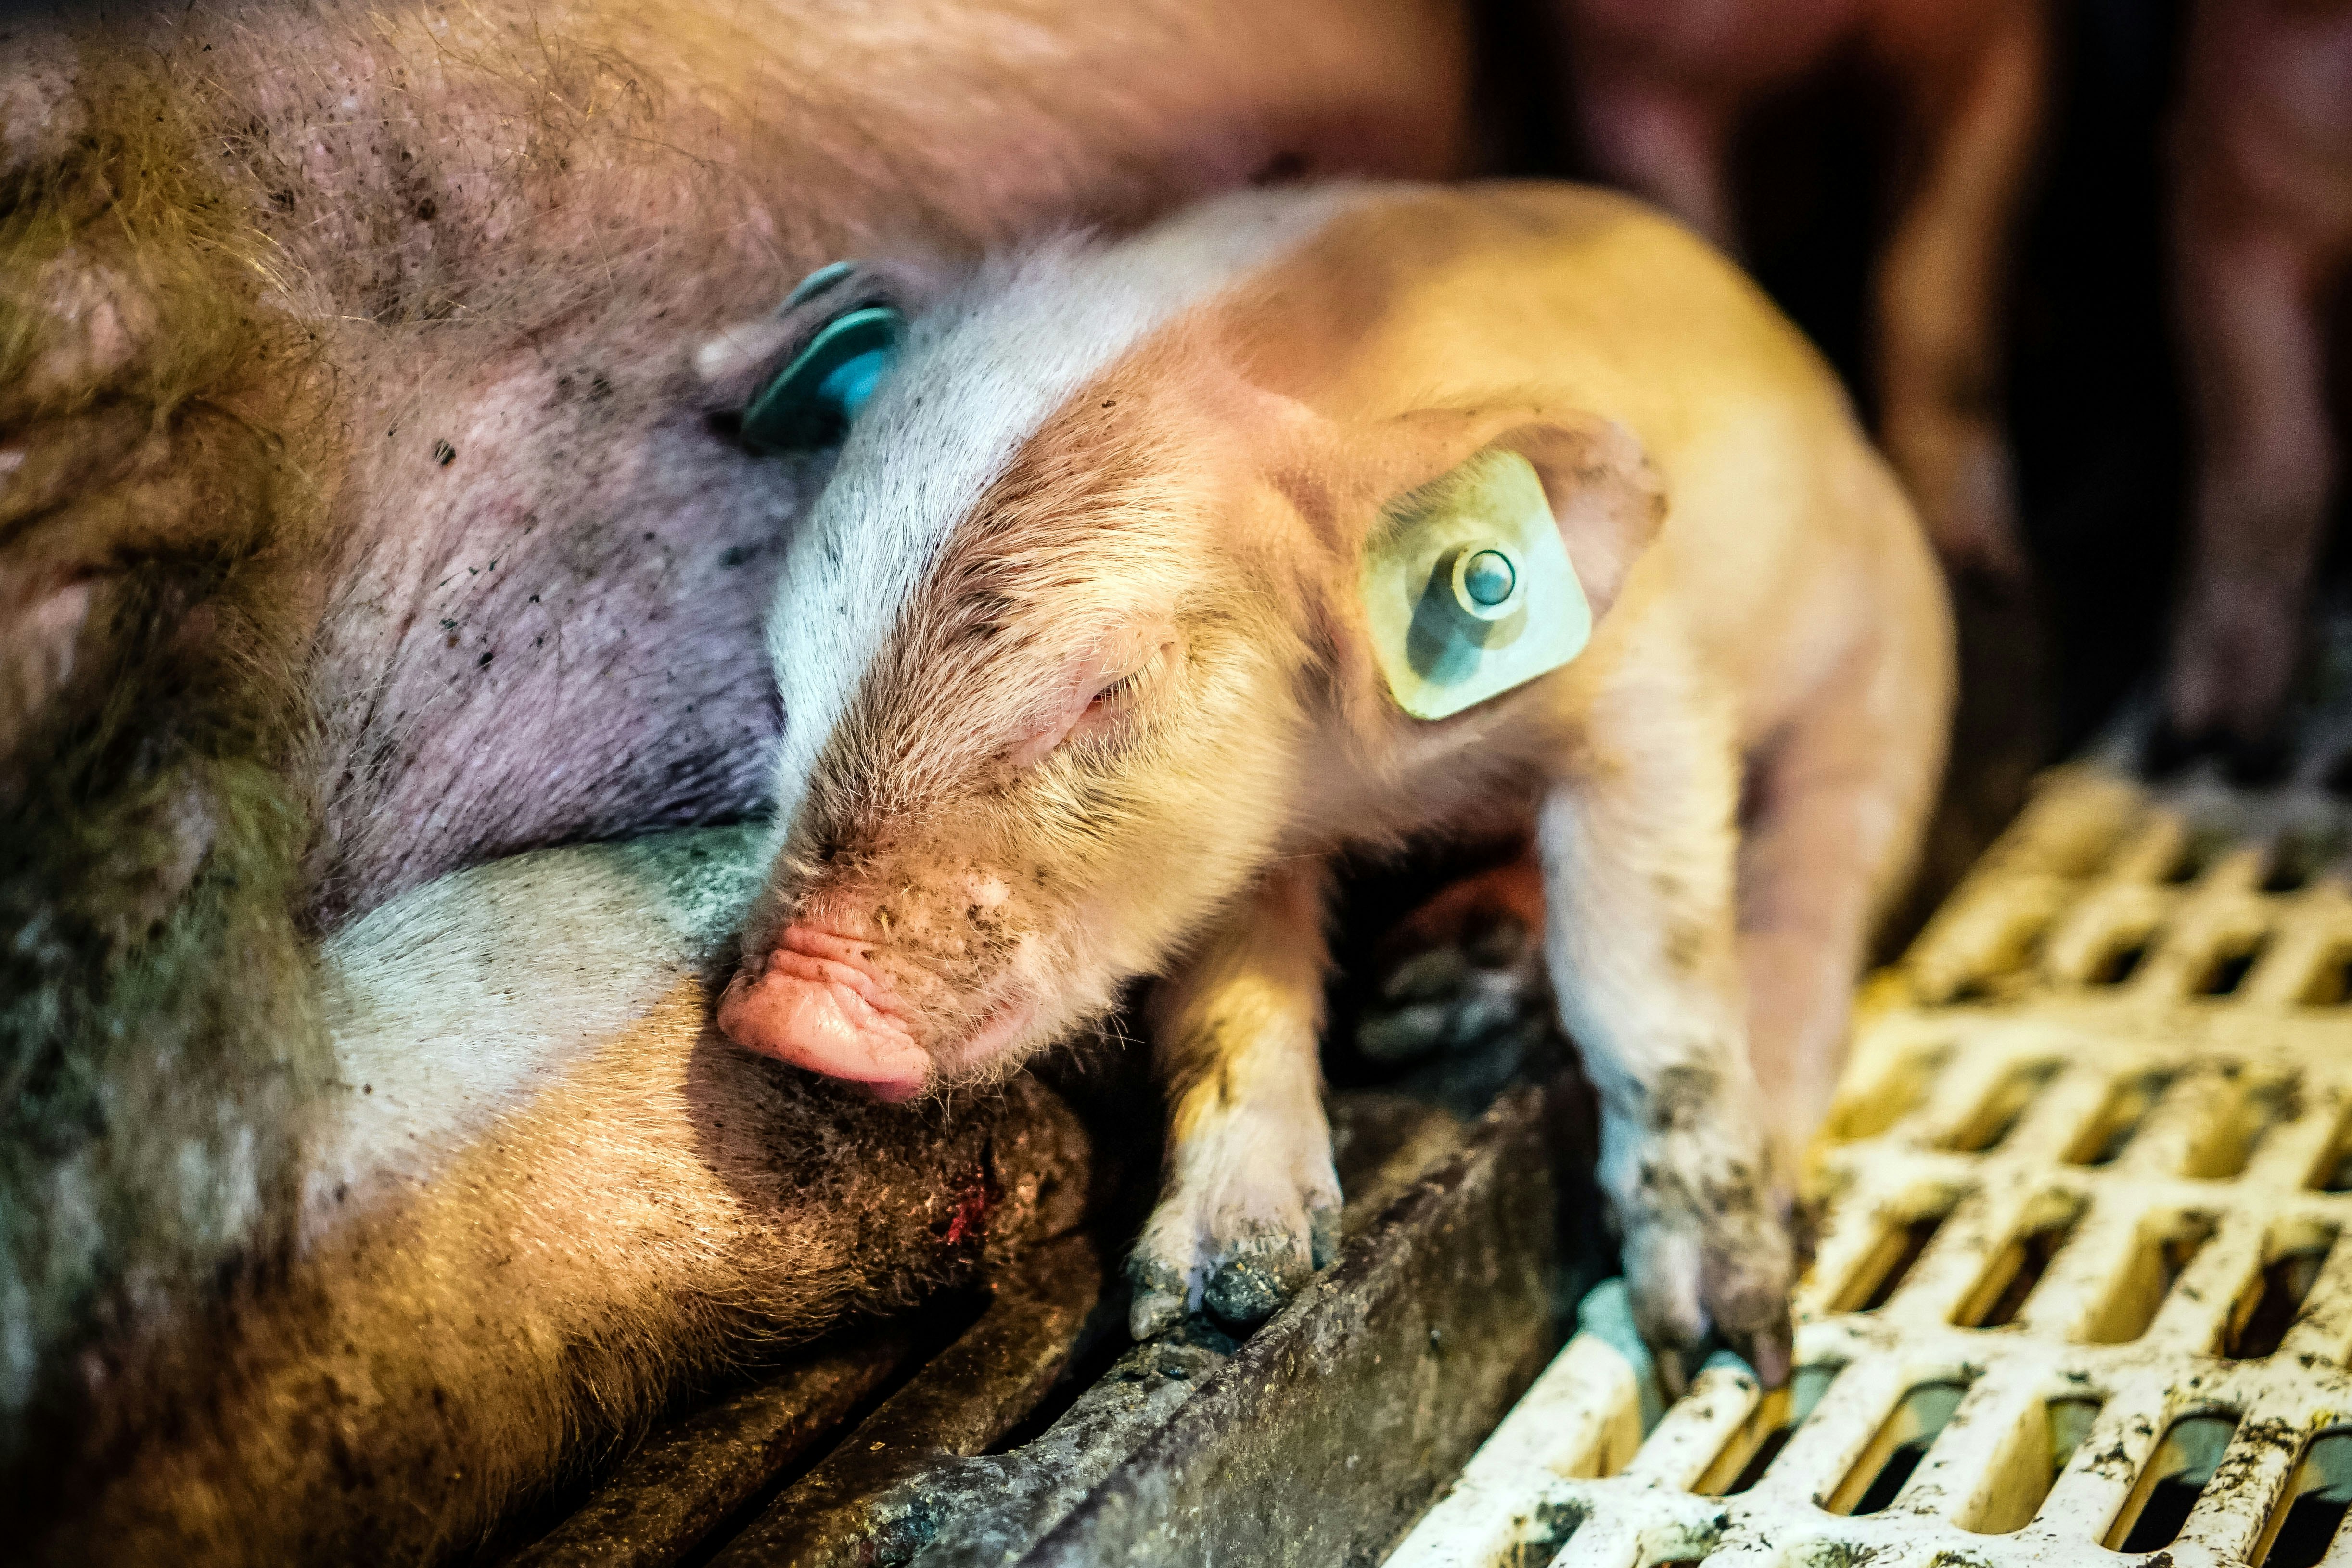 Smithfield-Circle-Four-Farms-piglets-pigs-factory-pig-aminal-cruelty-abuse-08-1506966754